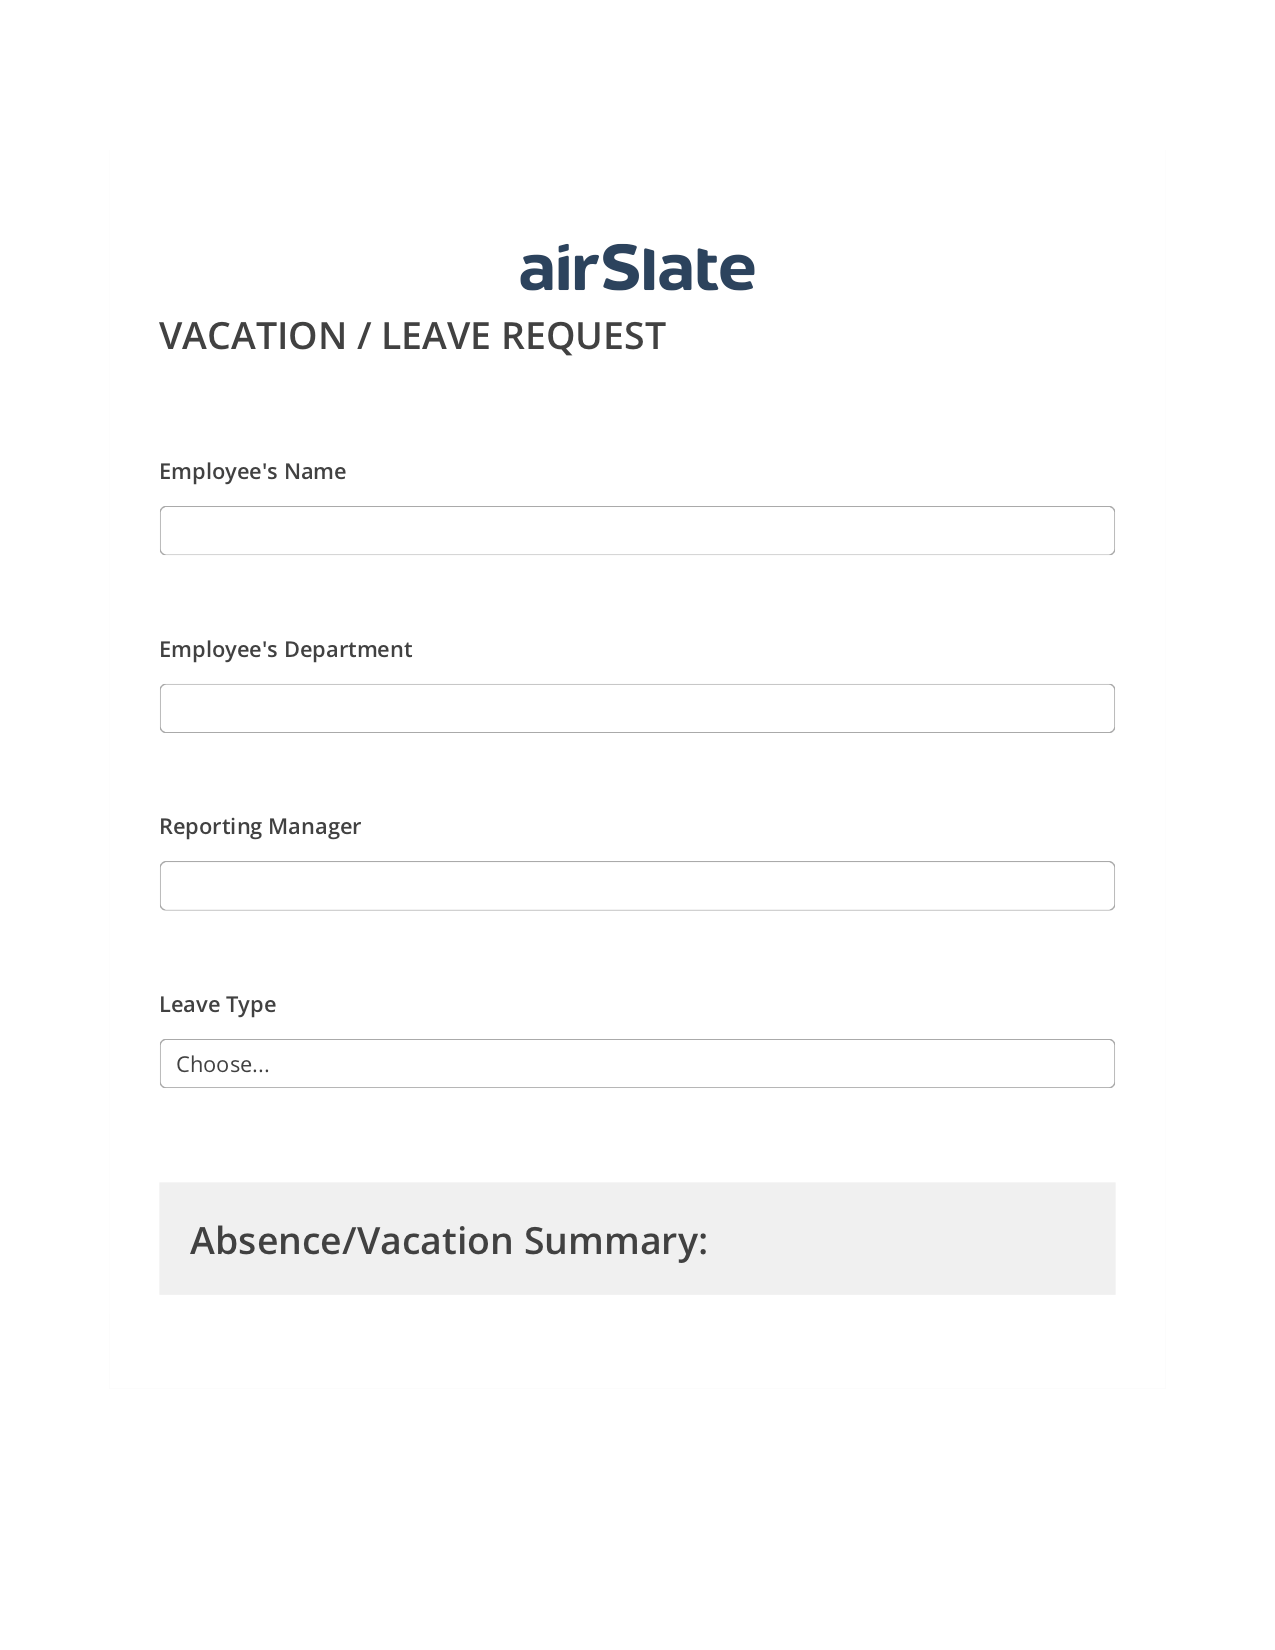 Vacation/Leave Request Workflow Pre-fill from MS Dynamics 365 Records, Create slate from another Flow Bot, Export to Salesforce Record Bot